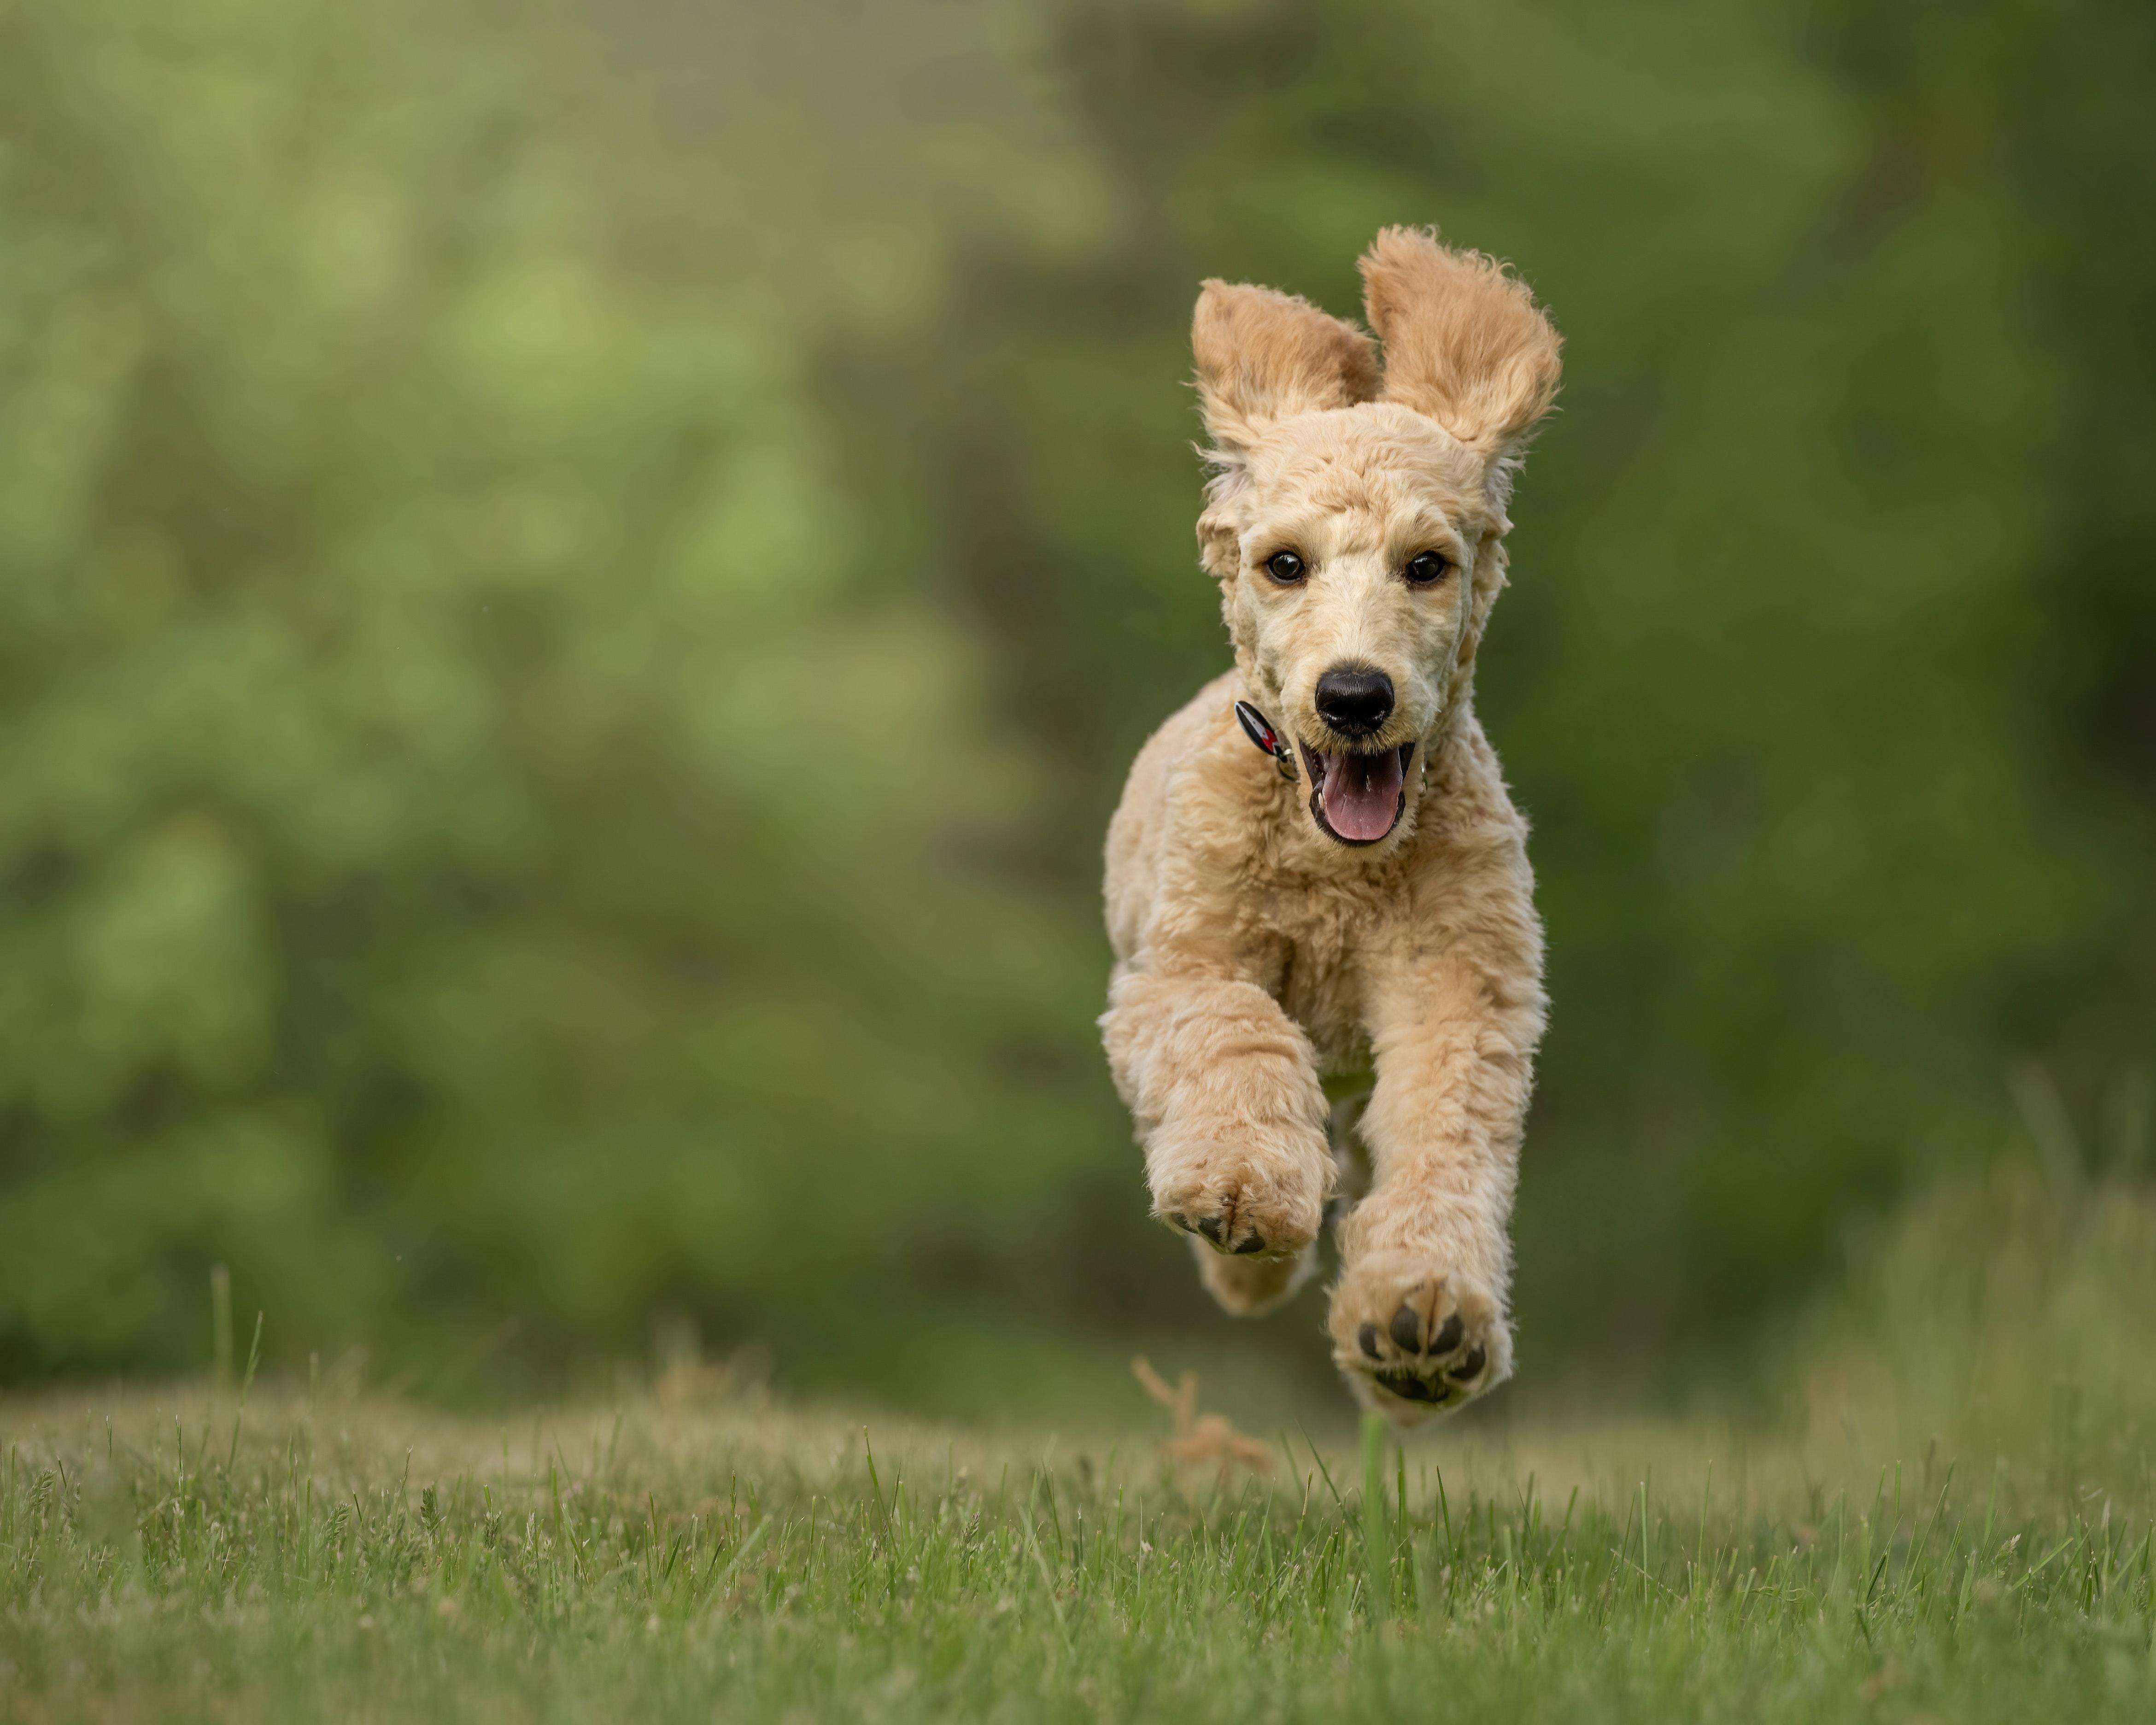 "Feeding a Goldendoodle Puppy: Tips for a Healthy Diet"